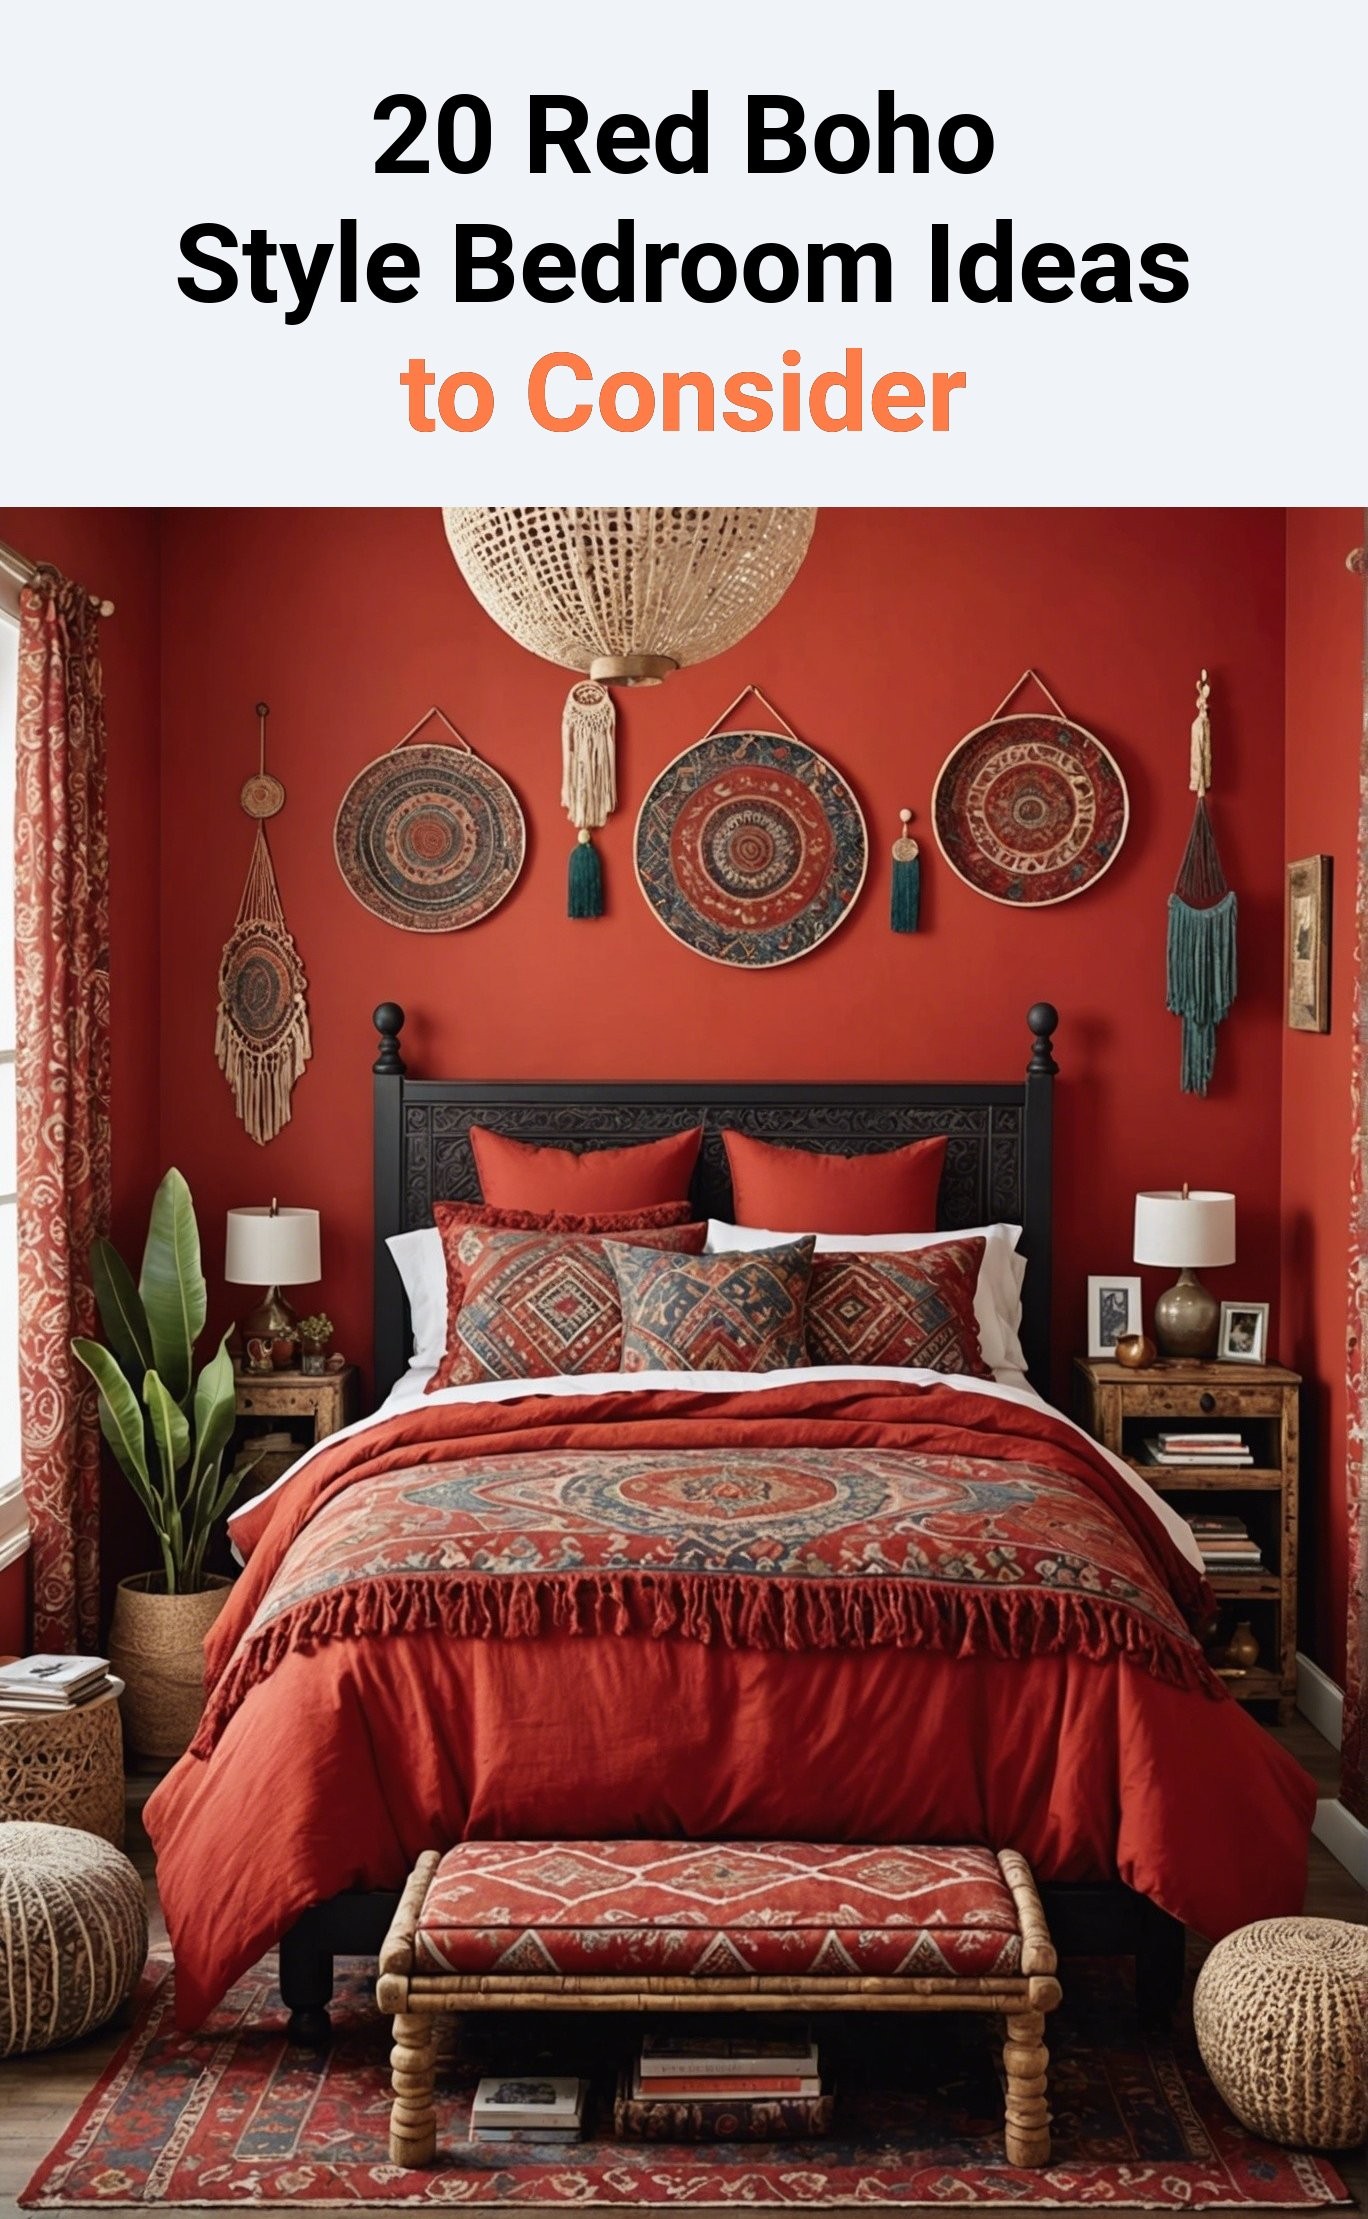 20 Red Boho Style Bedroom Ideas to Consider